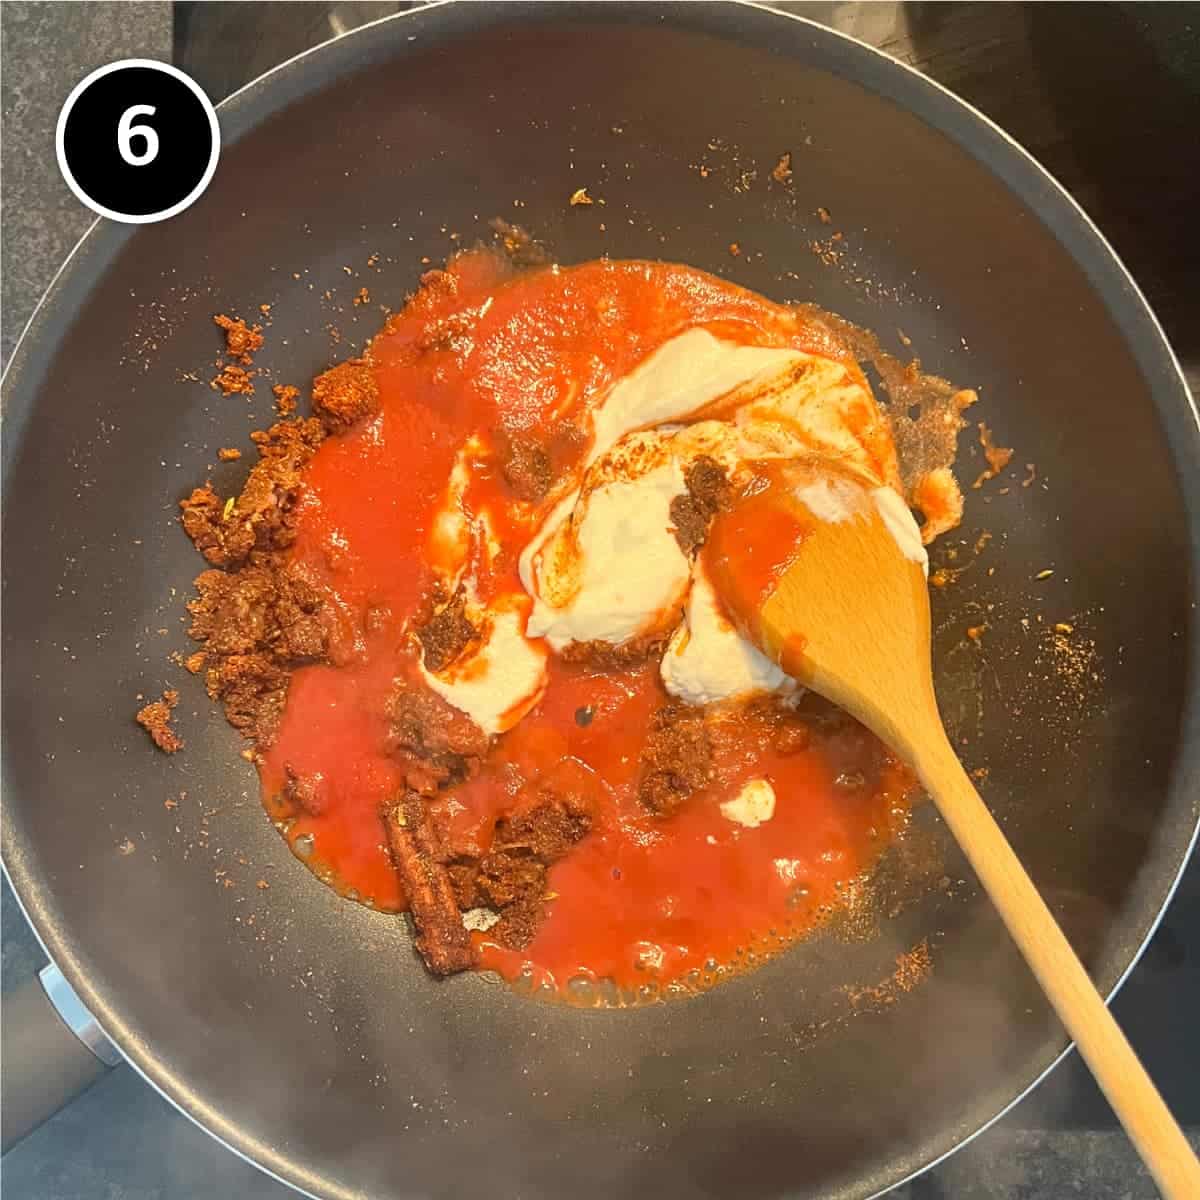 Adding tomato and yoghurt to a fried spice paste